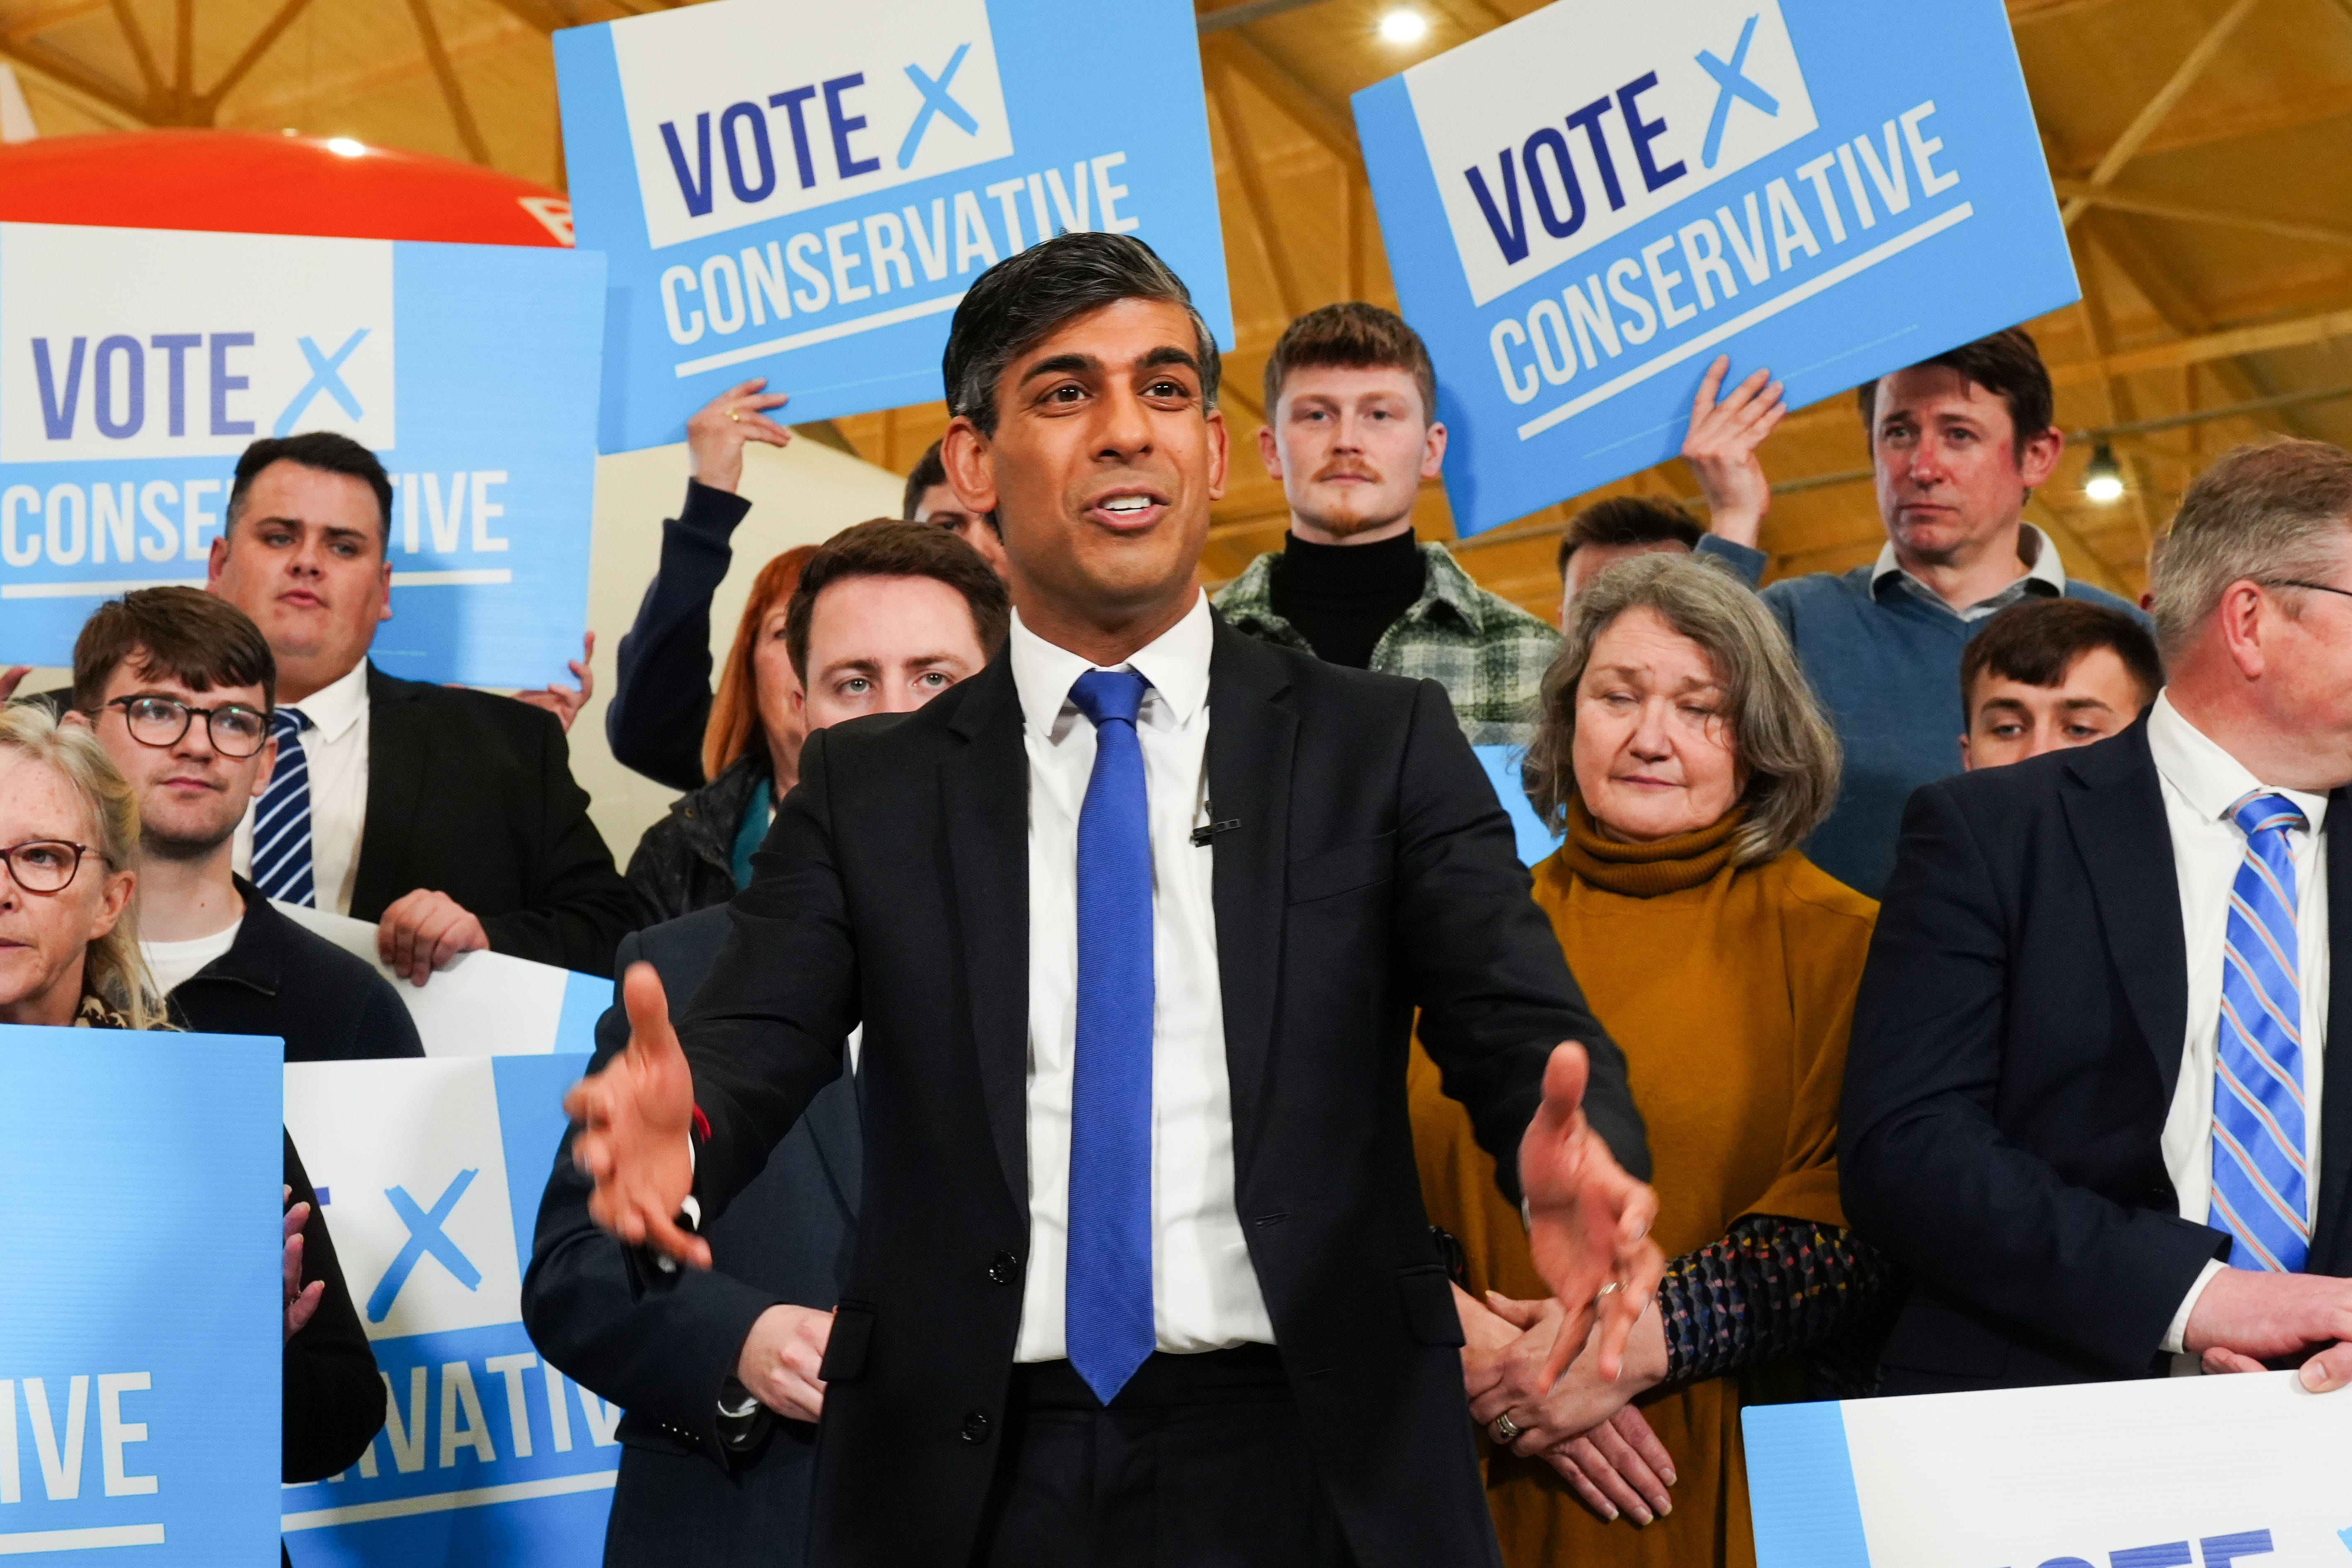 Prime Minister Rishi Sunak claimed there would be a hung parliament after the election